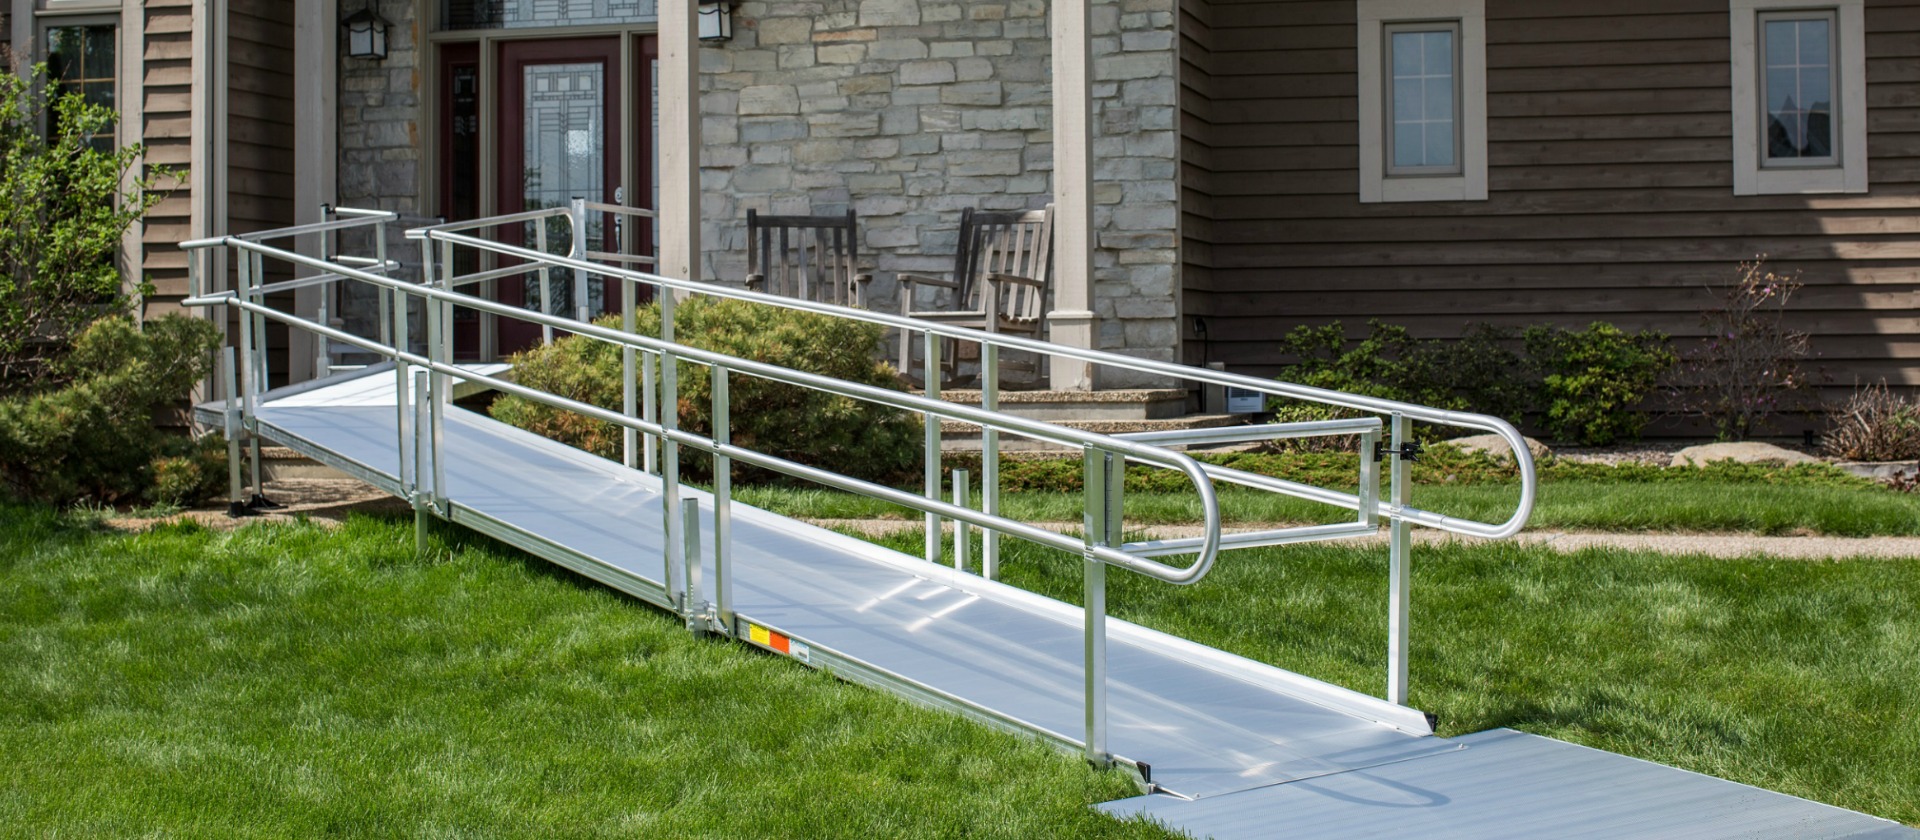 Michigan Wheelchair Ramp Al And, What Are The Requirements For Wheelchair Ramps In Michigan